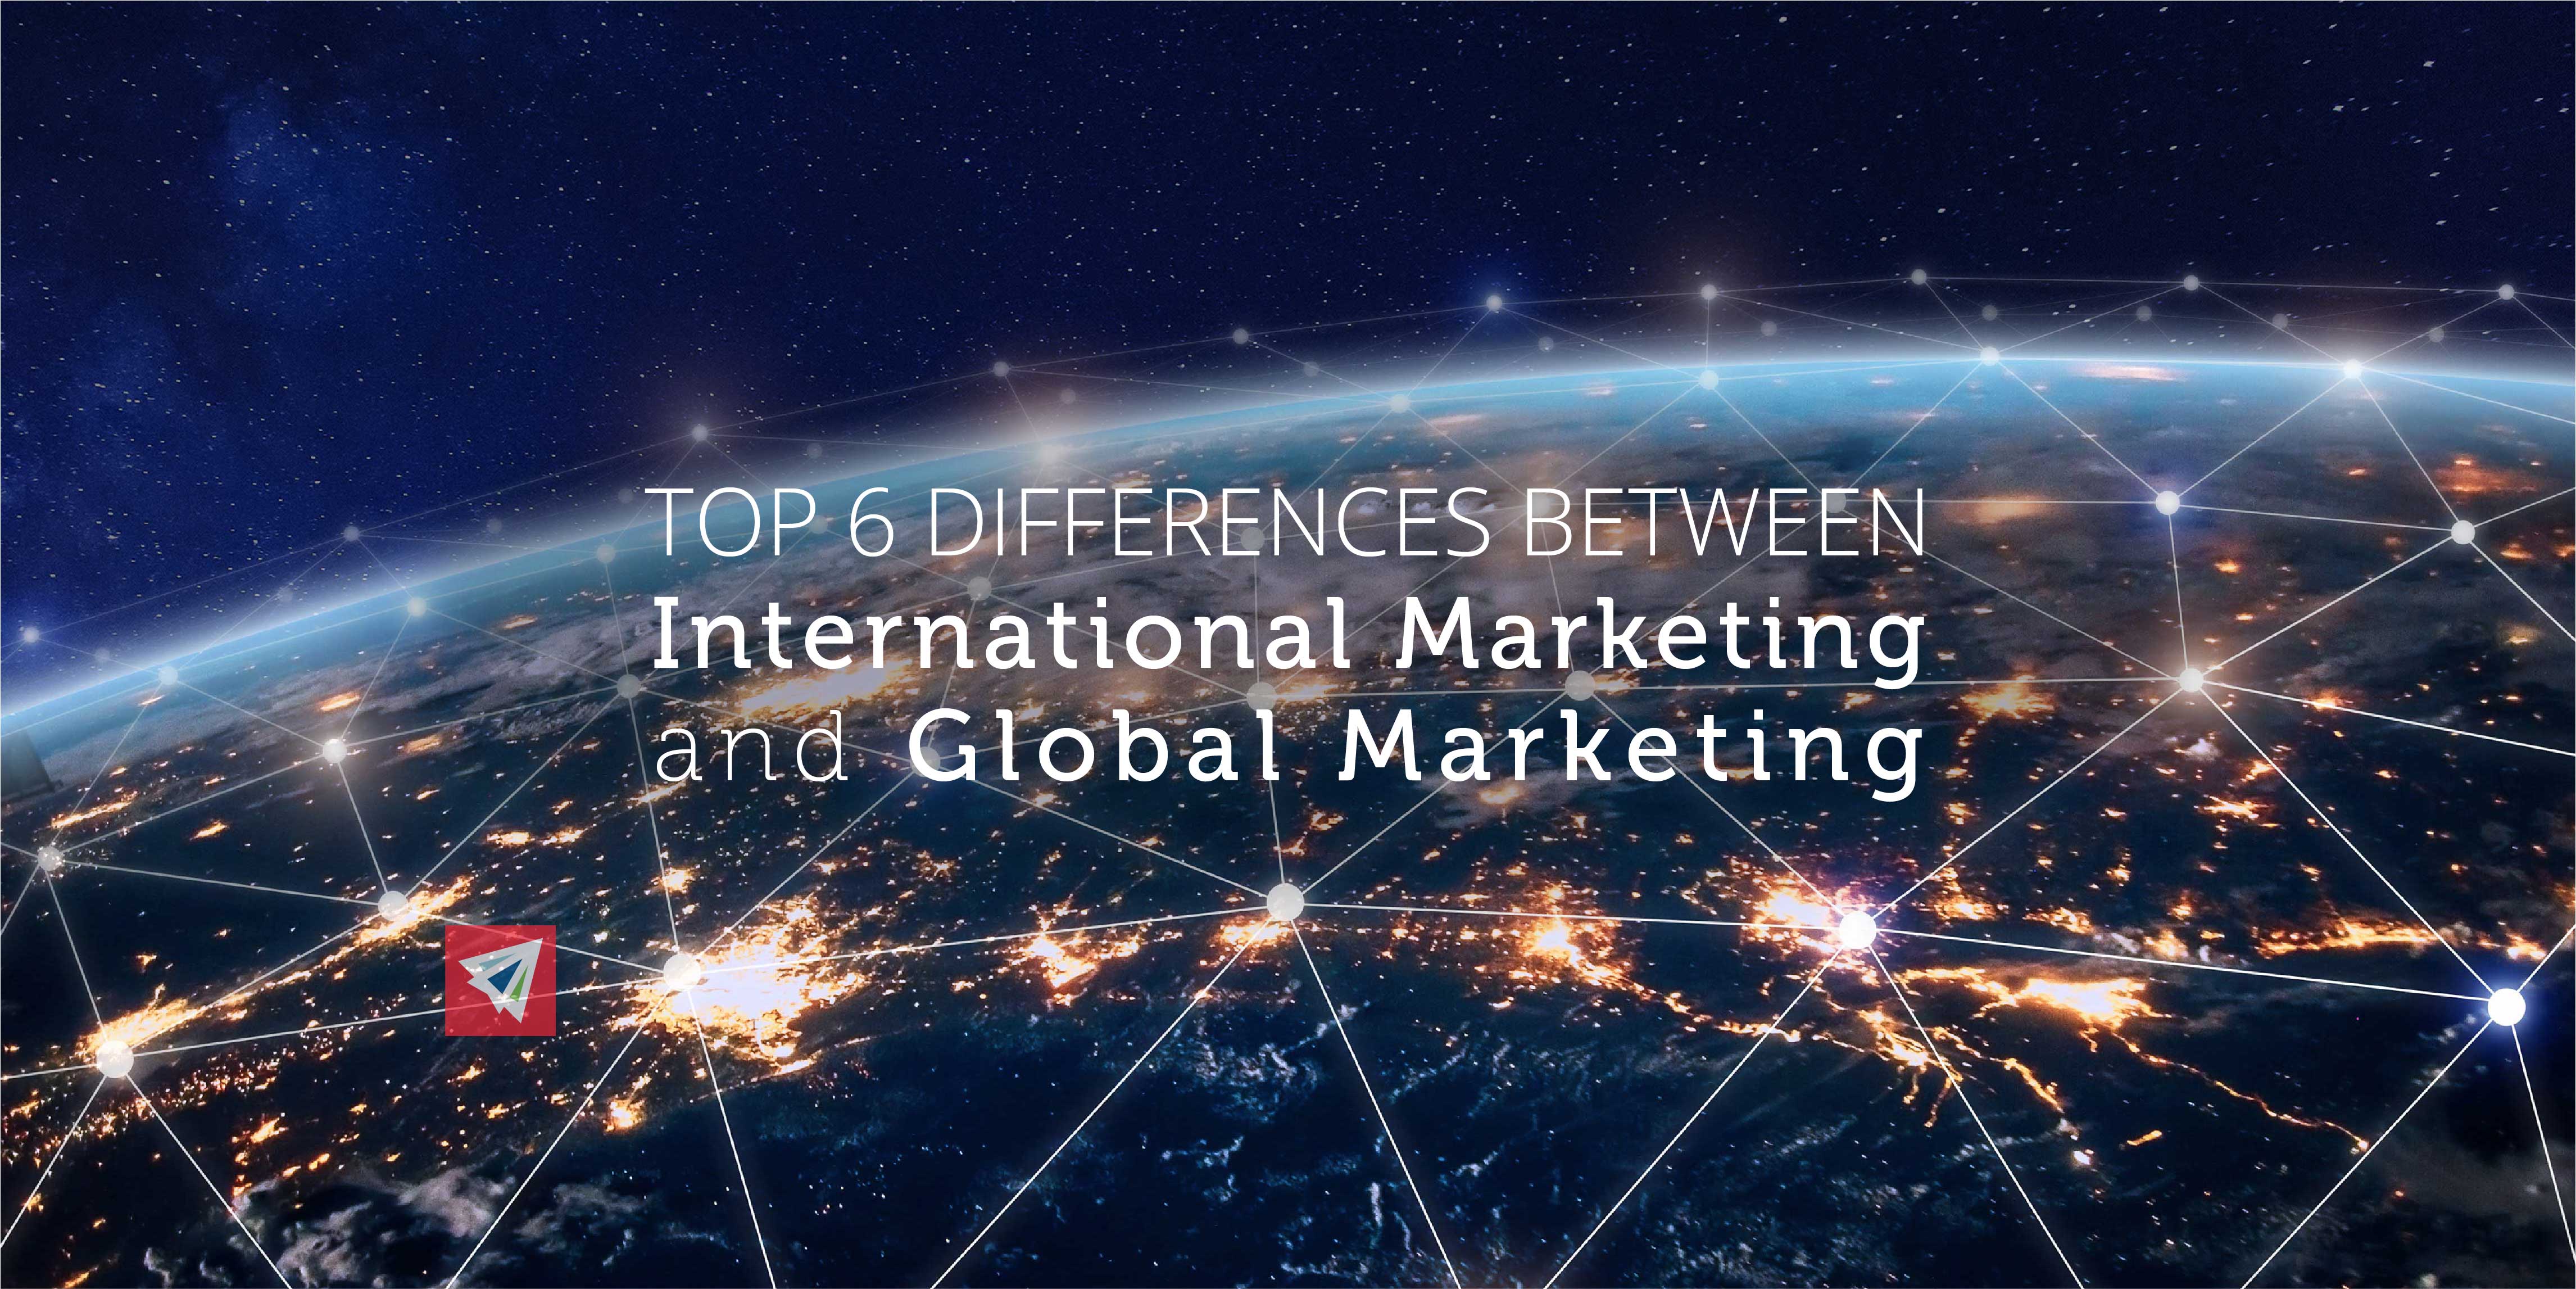 Top 6 Differences Between International Marketing and Global Marketing